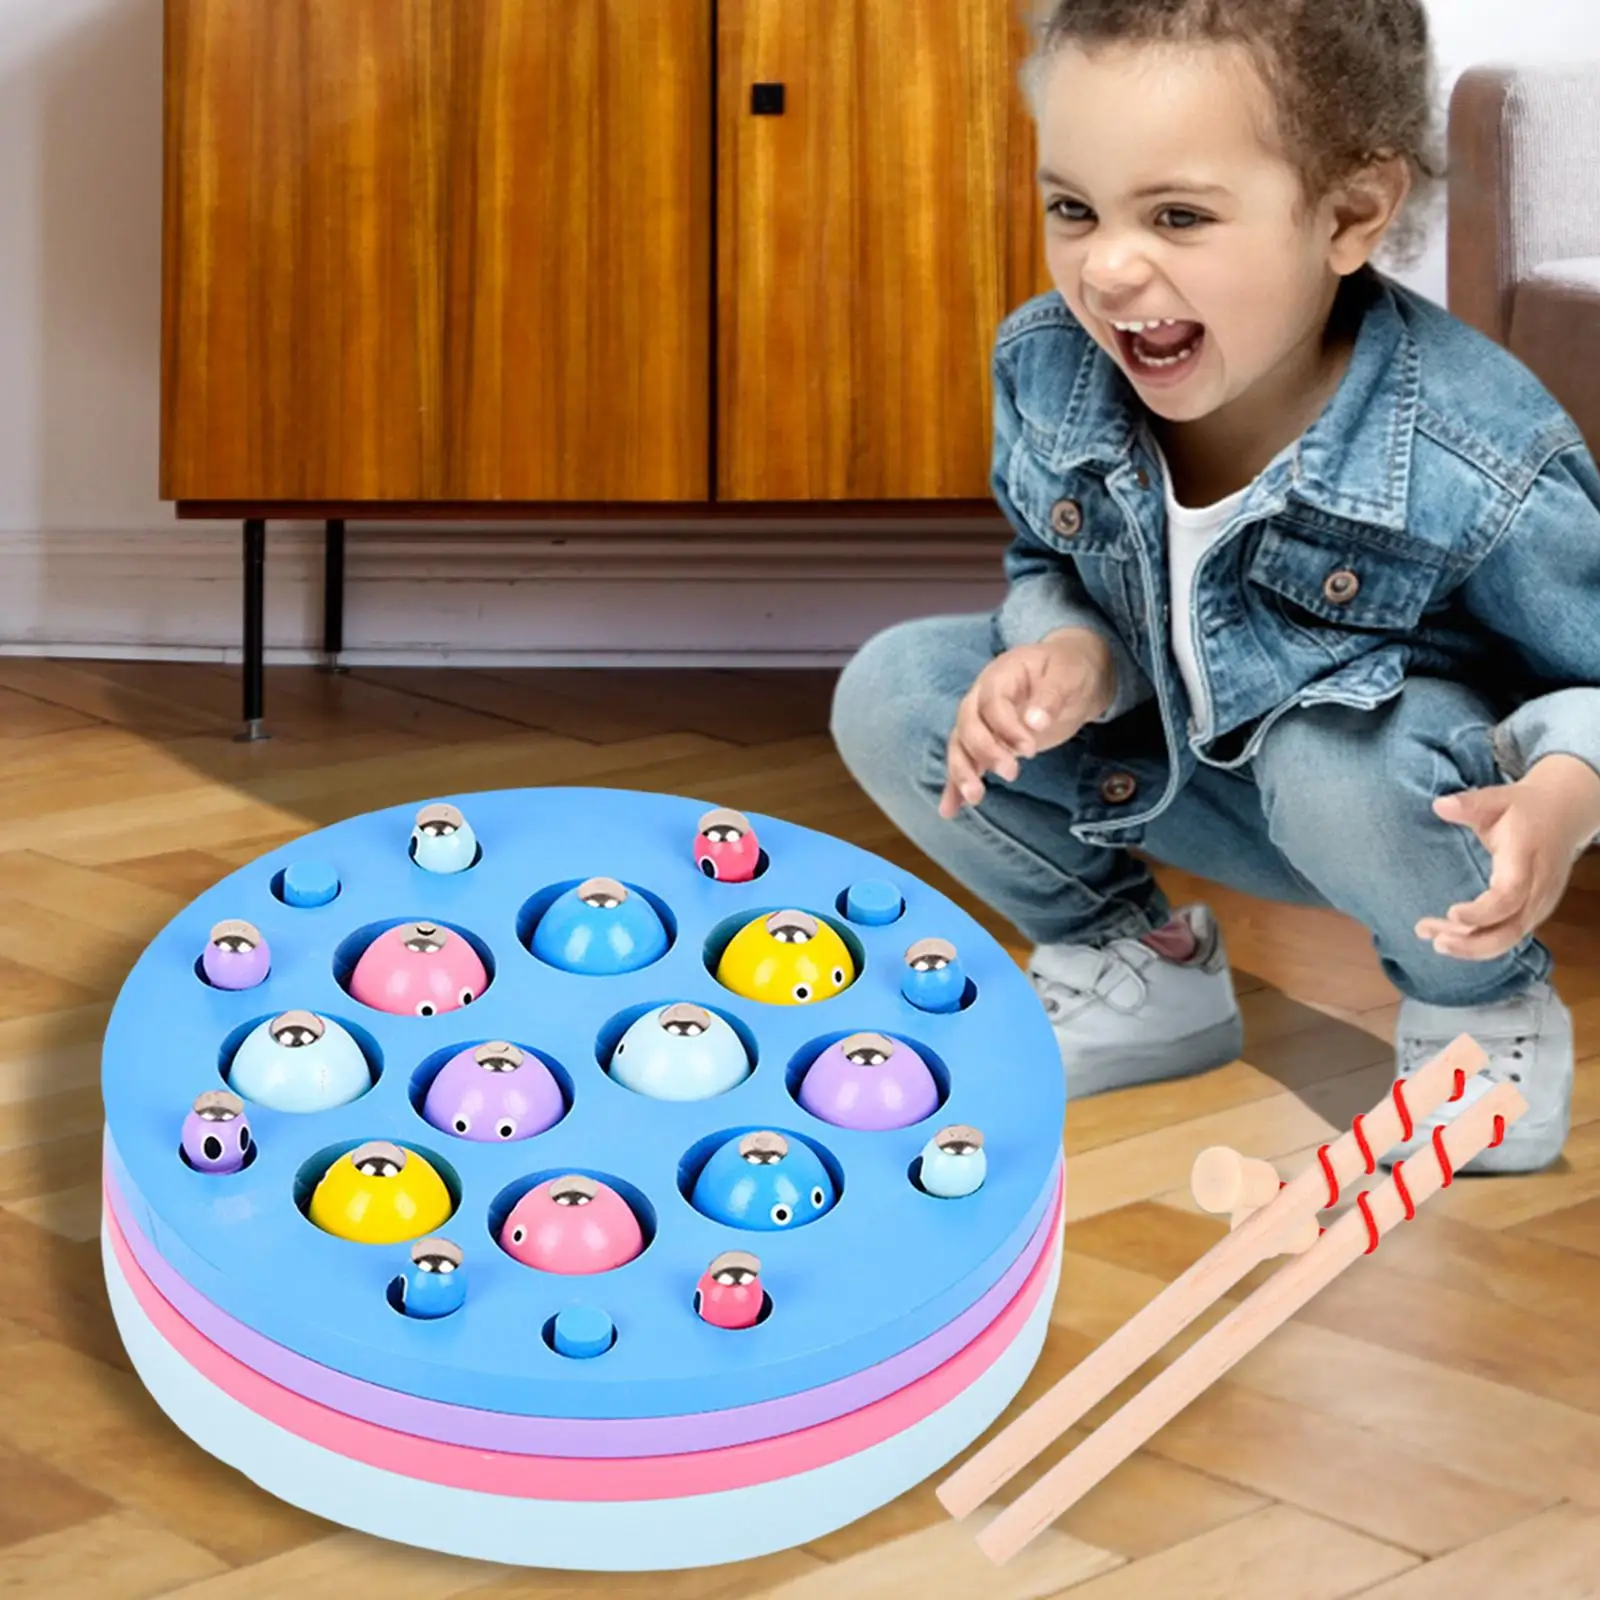 Montessori Toys Wooden Magnetic Fishing Game Color Sorting Puzzle for Boys and Girls Gift Early Learning Interractive Durable